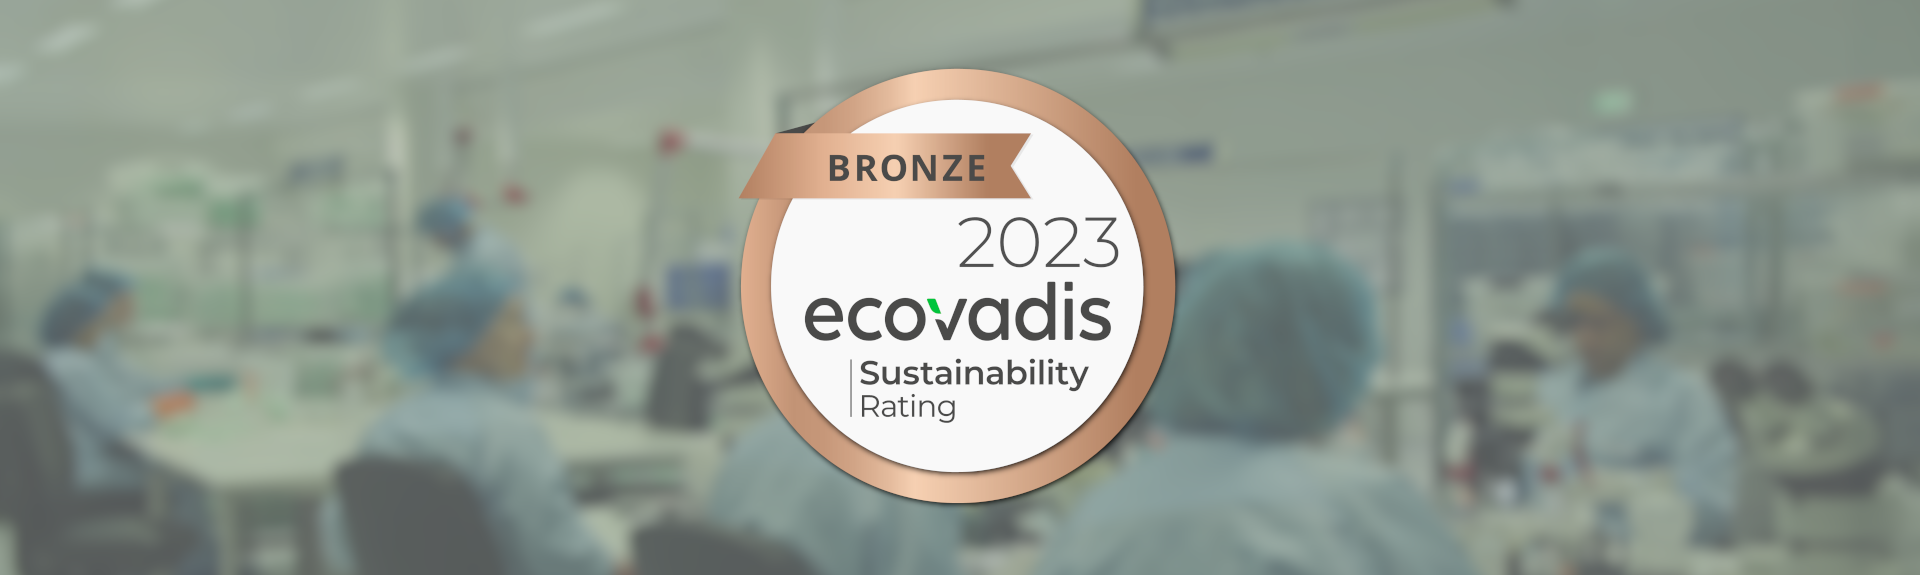 DORC has been awarded the EcoVadis Bronze Medal